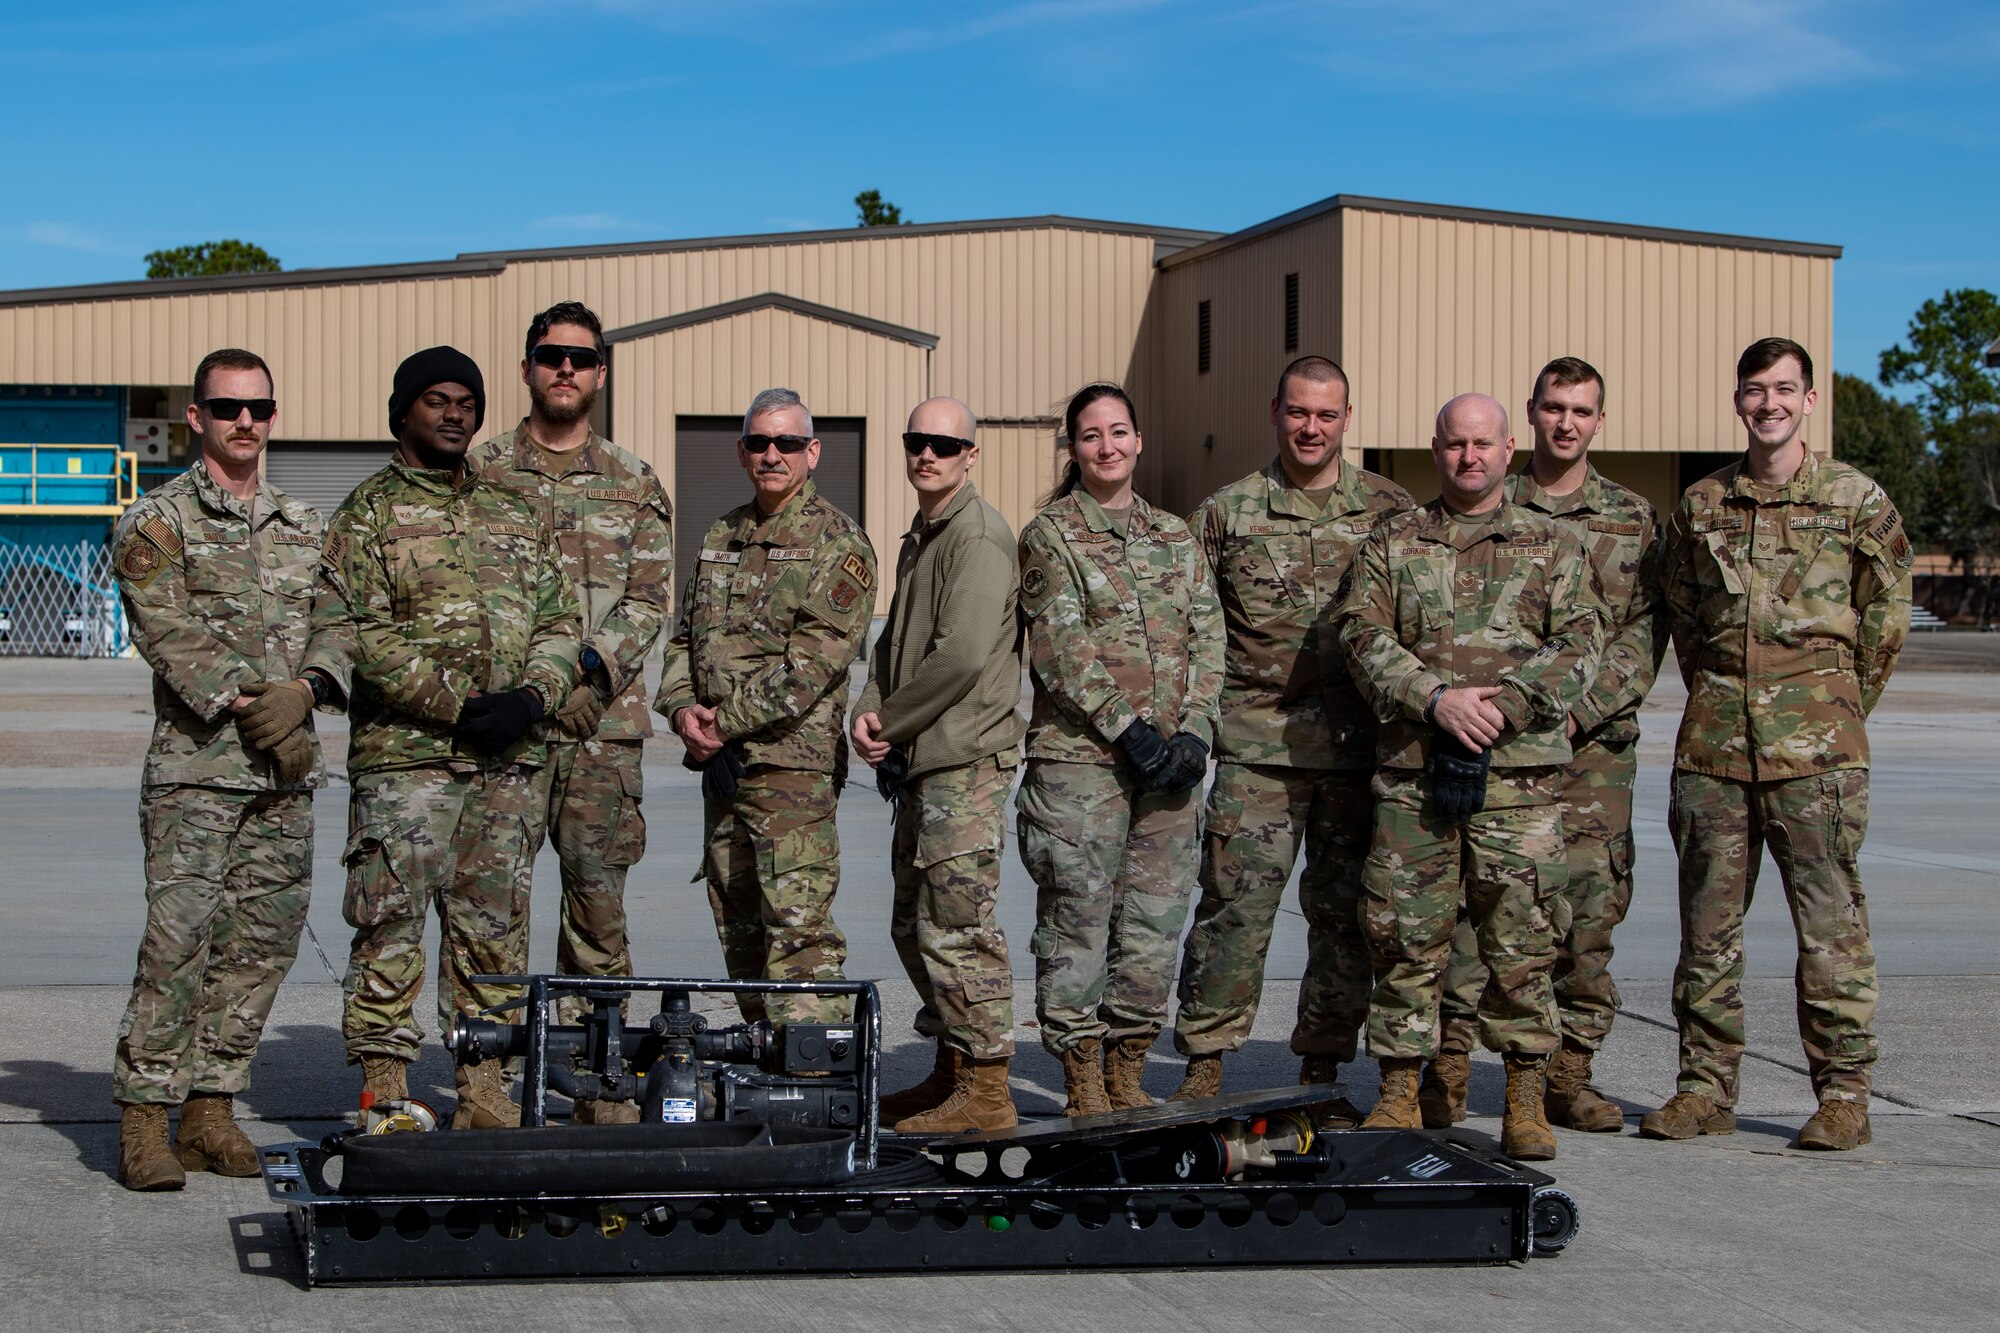 U.S. Air Force Airmen assigned to the 23rd Logistics Readiness Squadron and Guardsmen assigned to the 158th Fighter Squadron smile for a photo at Moody Air Force Base, Georgia, Dec. 12, 2023. The Guardsmen came to Moody AFB for special fuel operations familiarization. (U.S. Air Force photo by Senior Airman Courtney Sebastianelli)